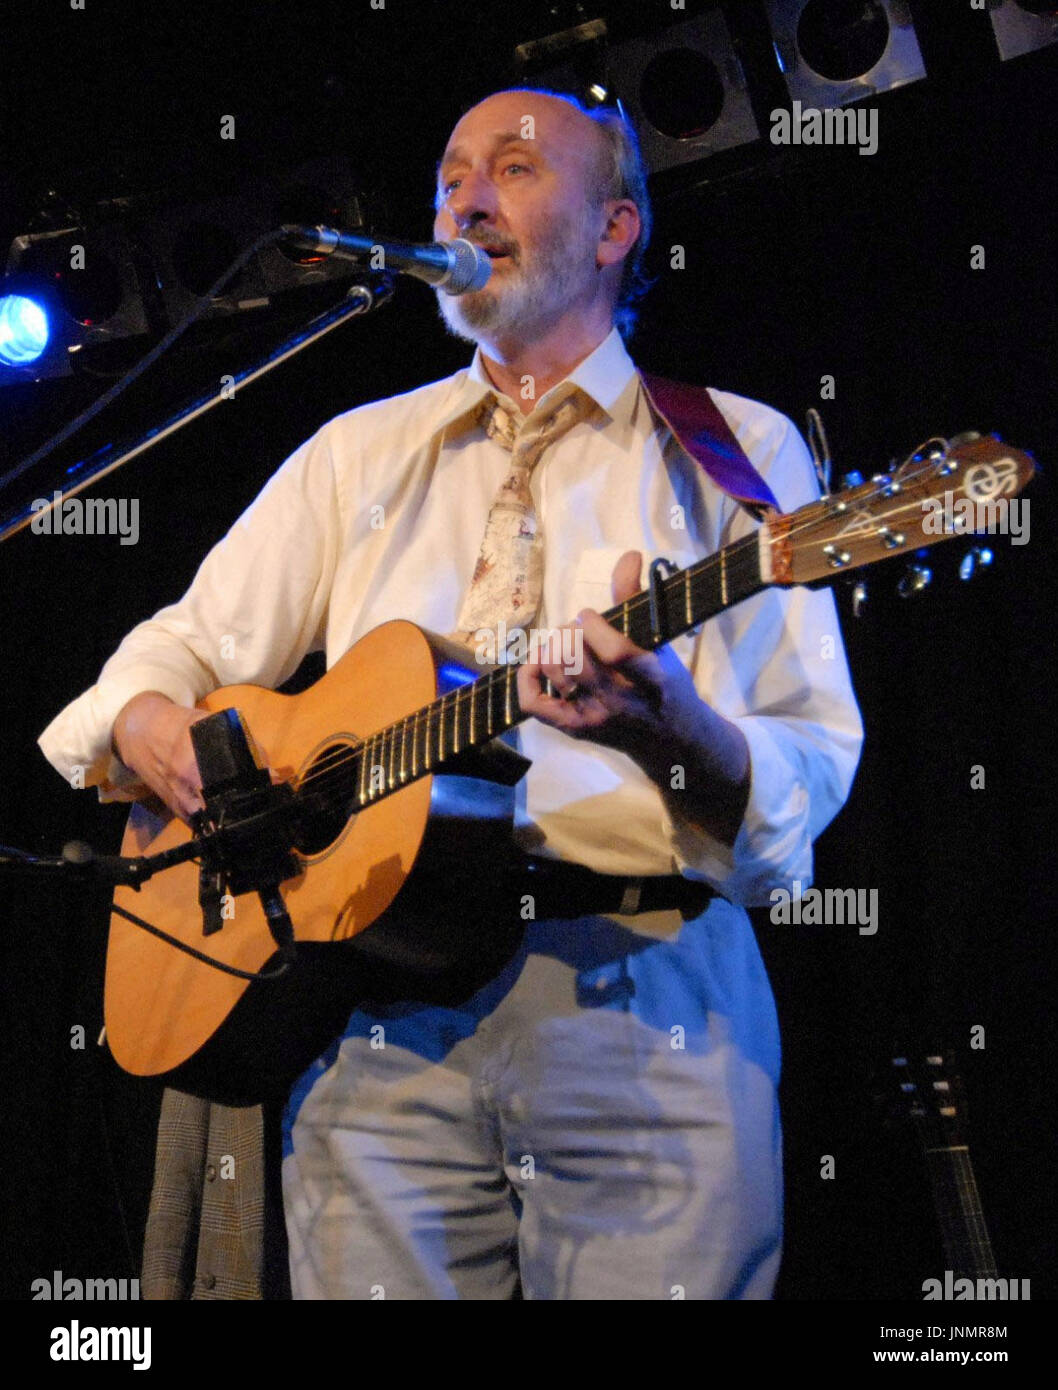 TOKYO, Japan - American folk singer Paul Stookey, a member of the legendary group Peter, Paul & Mary, sings ''Song for Megumi,'' a song dedicated to abductee Megumi Yokota, on Feb. 18 at a concert in Tokyo to an audience of about 80. (Kyodo) Stock Photo